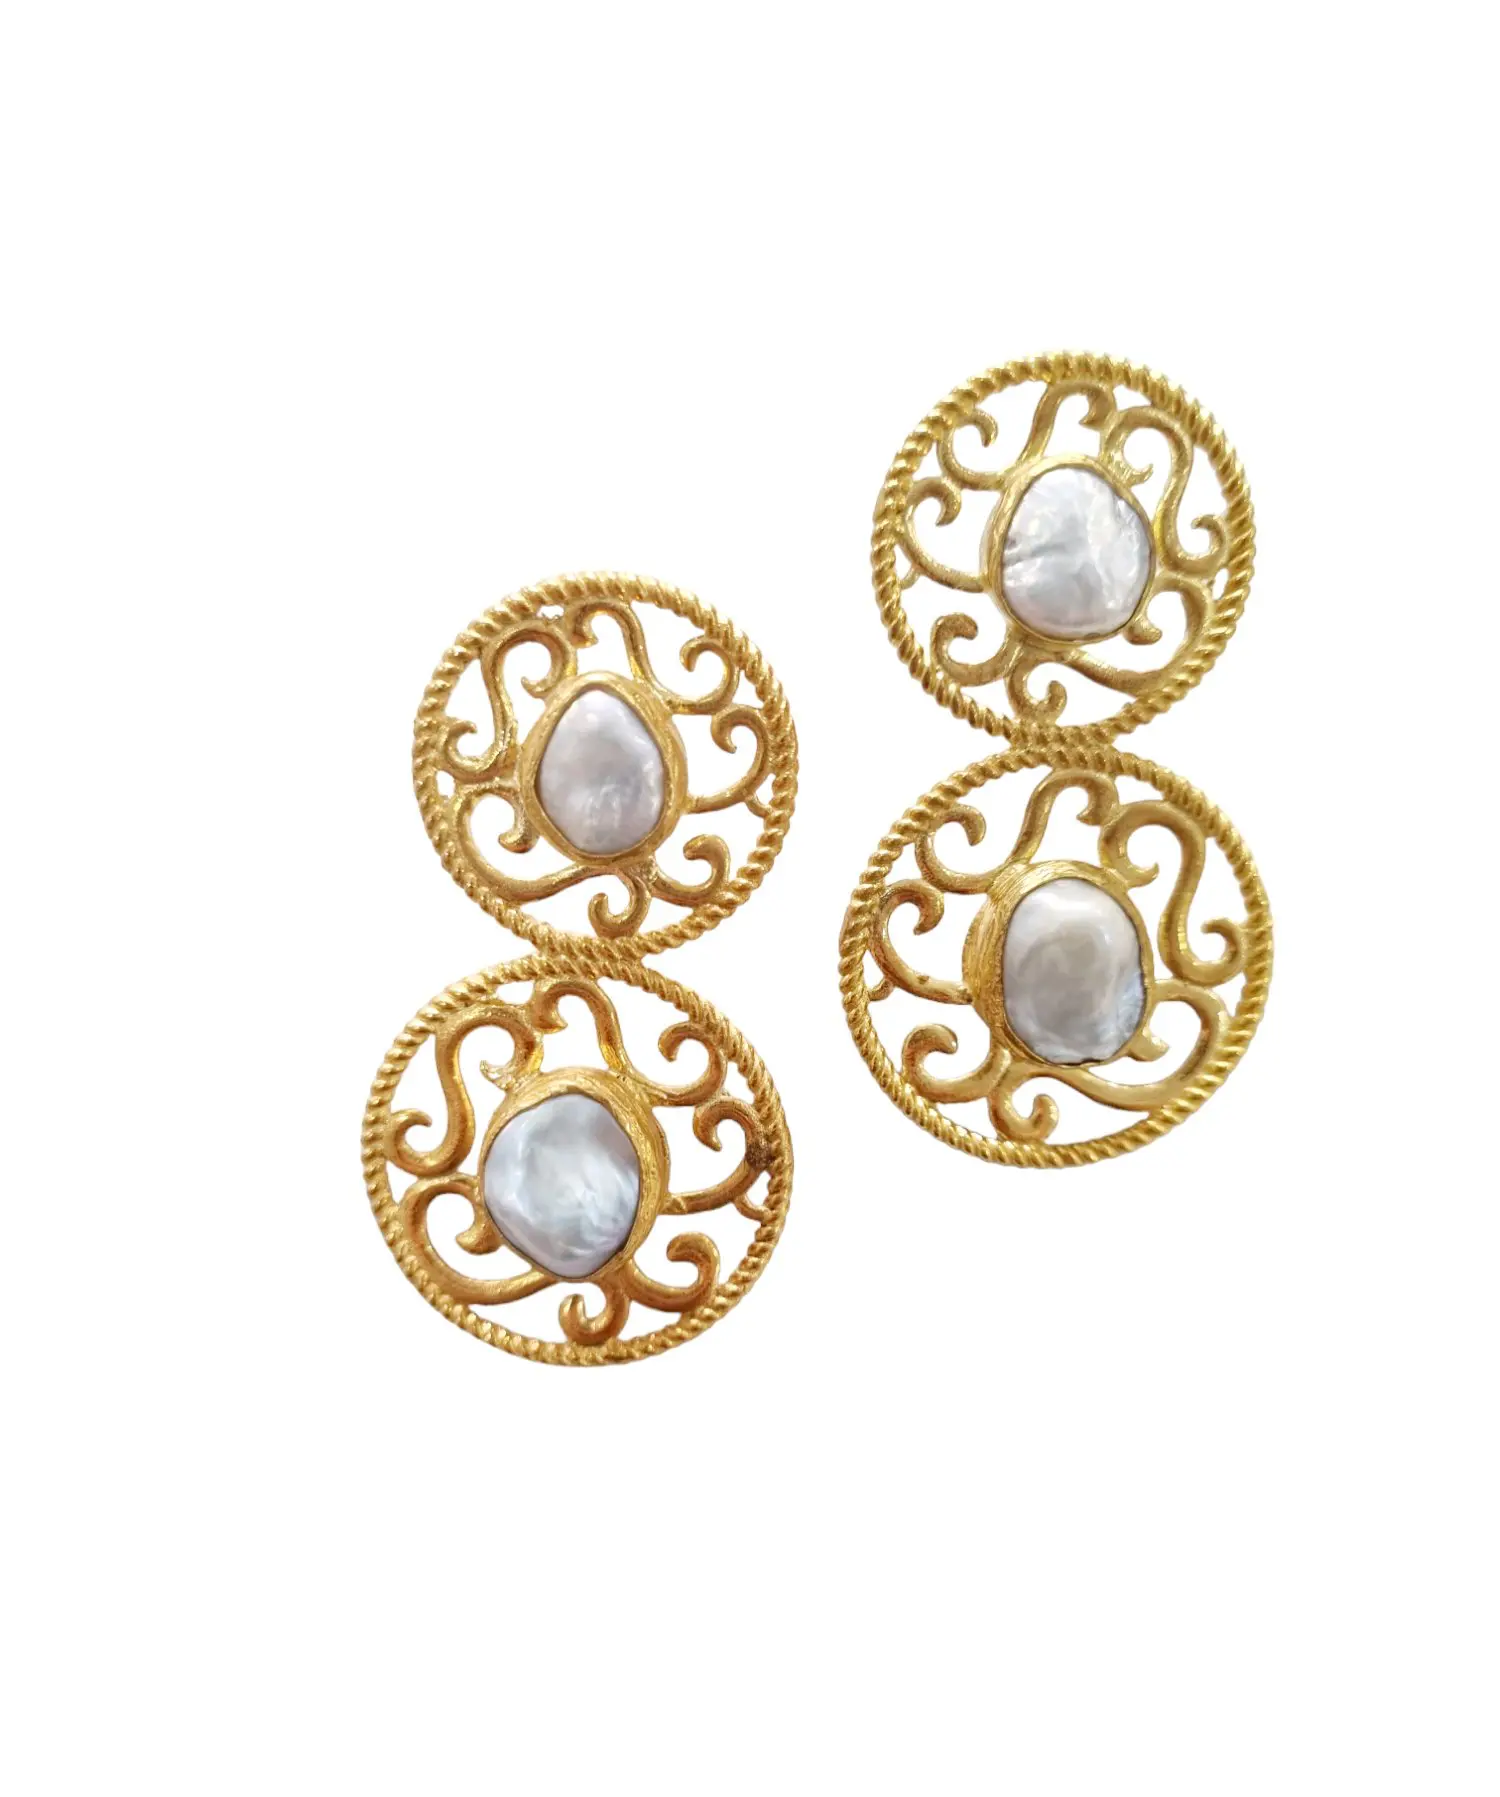 Earrings made with pearls set in brass. weight 8.9grLength 5cm